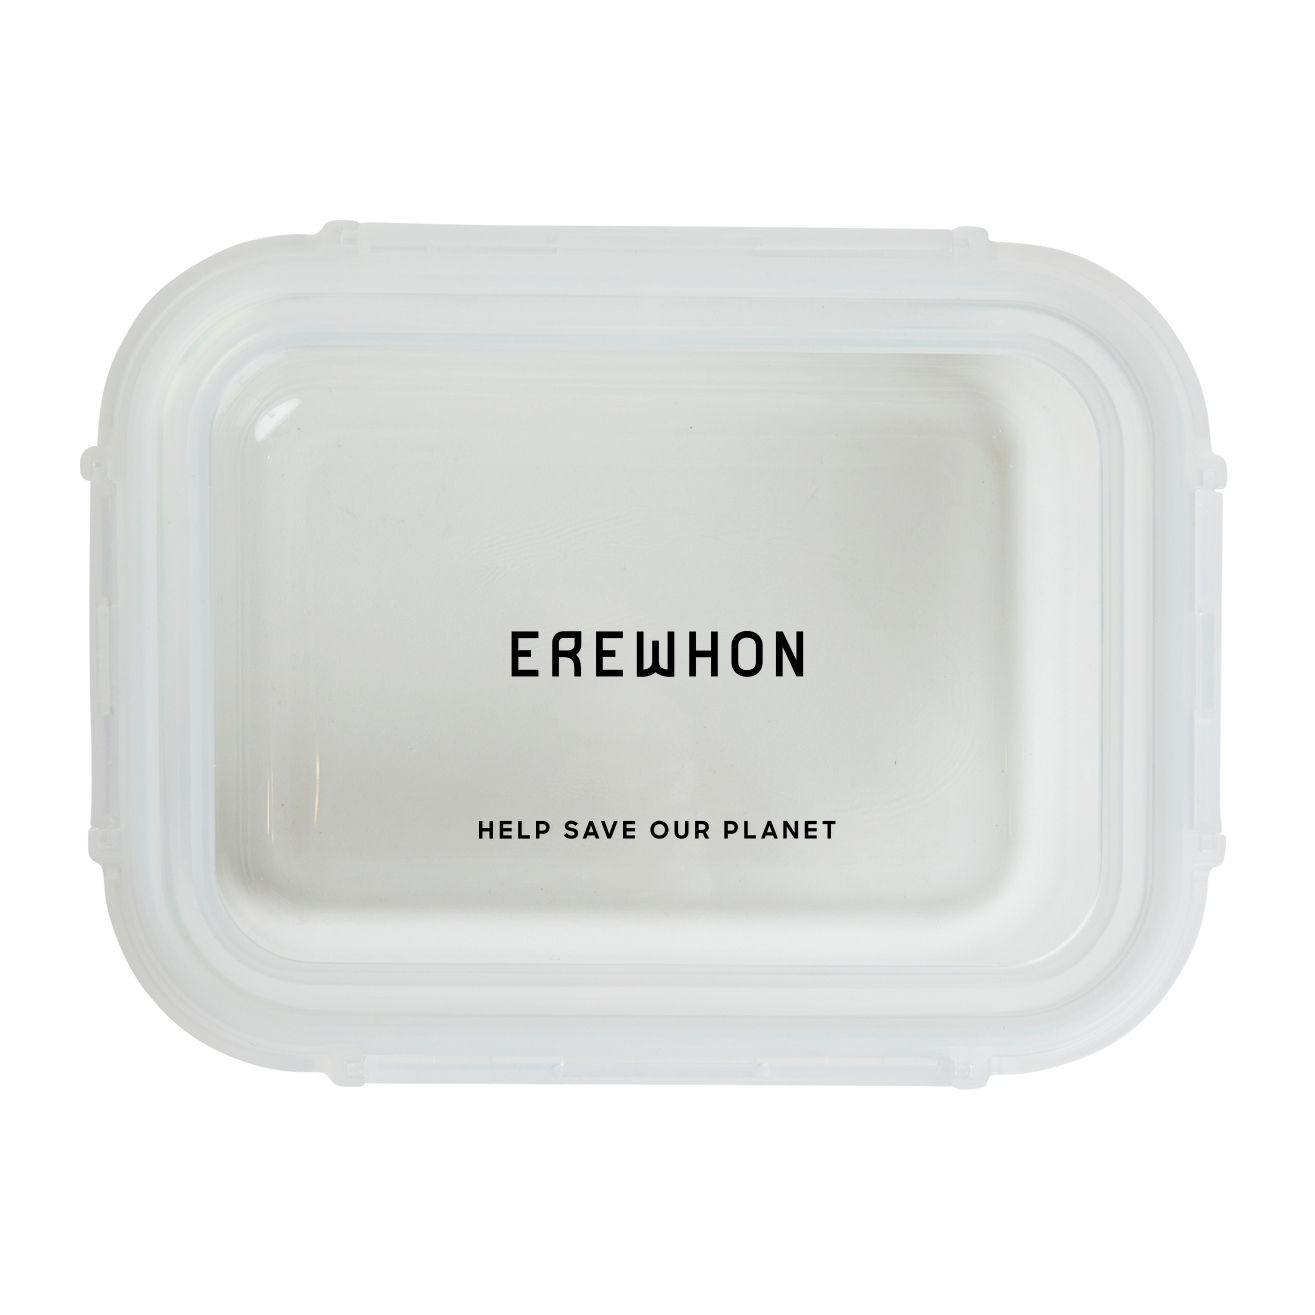 Overview shot of Erewhon glass storage containers - large